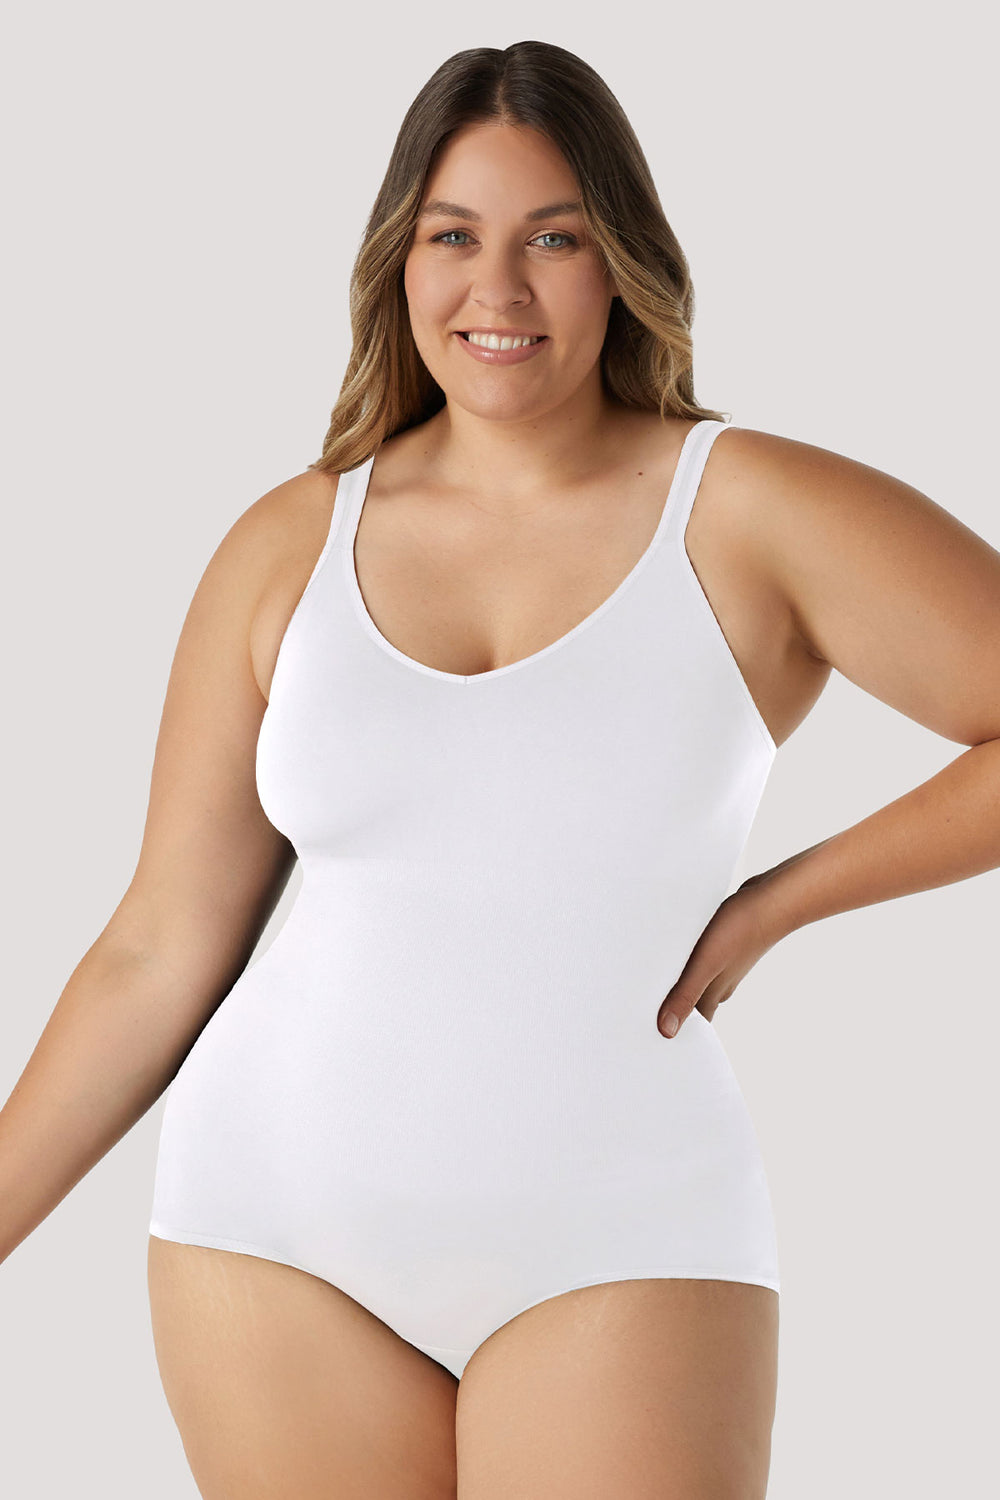 Shaping stretchy firming Bodysuit | Bella Bodies Australia | White | Front